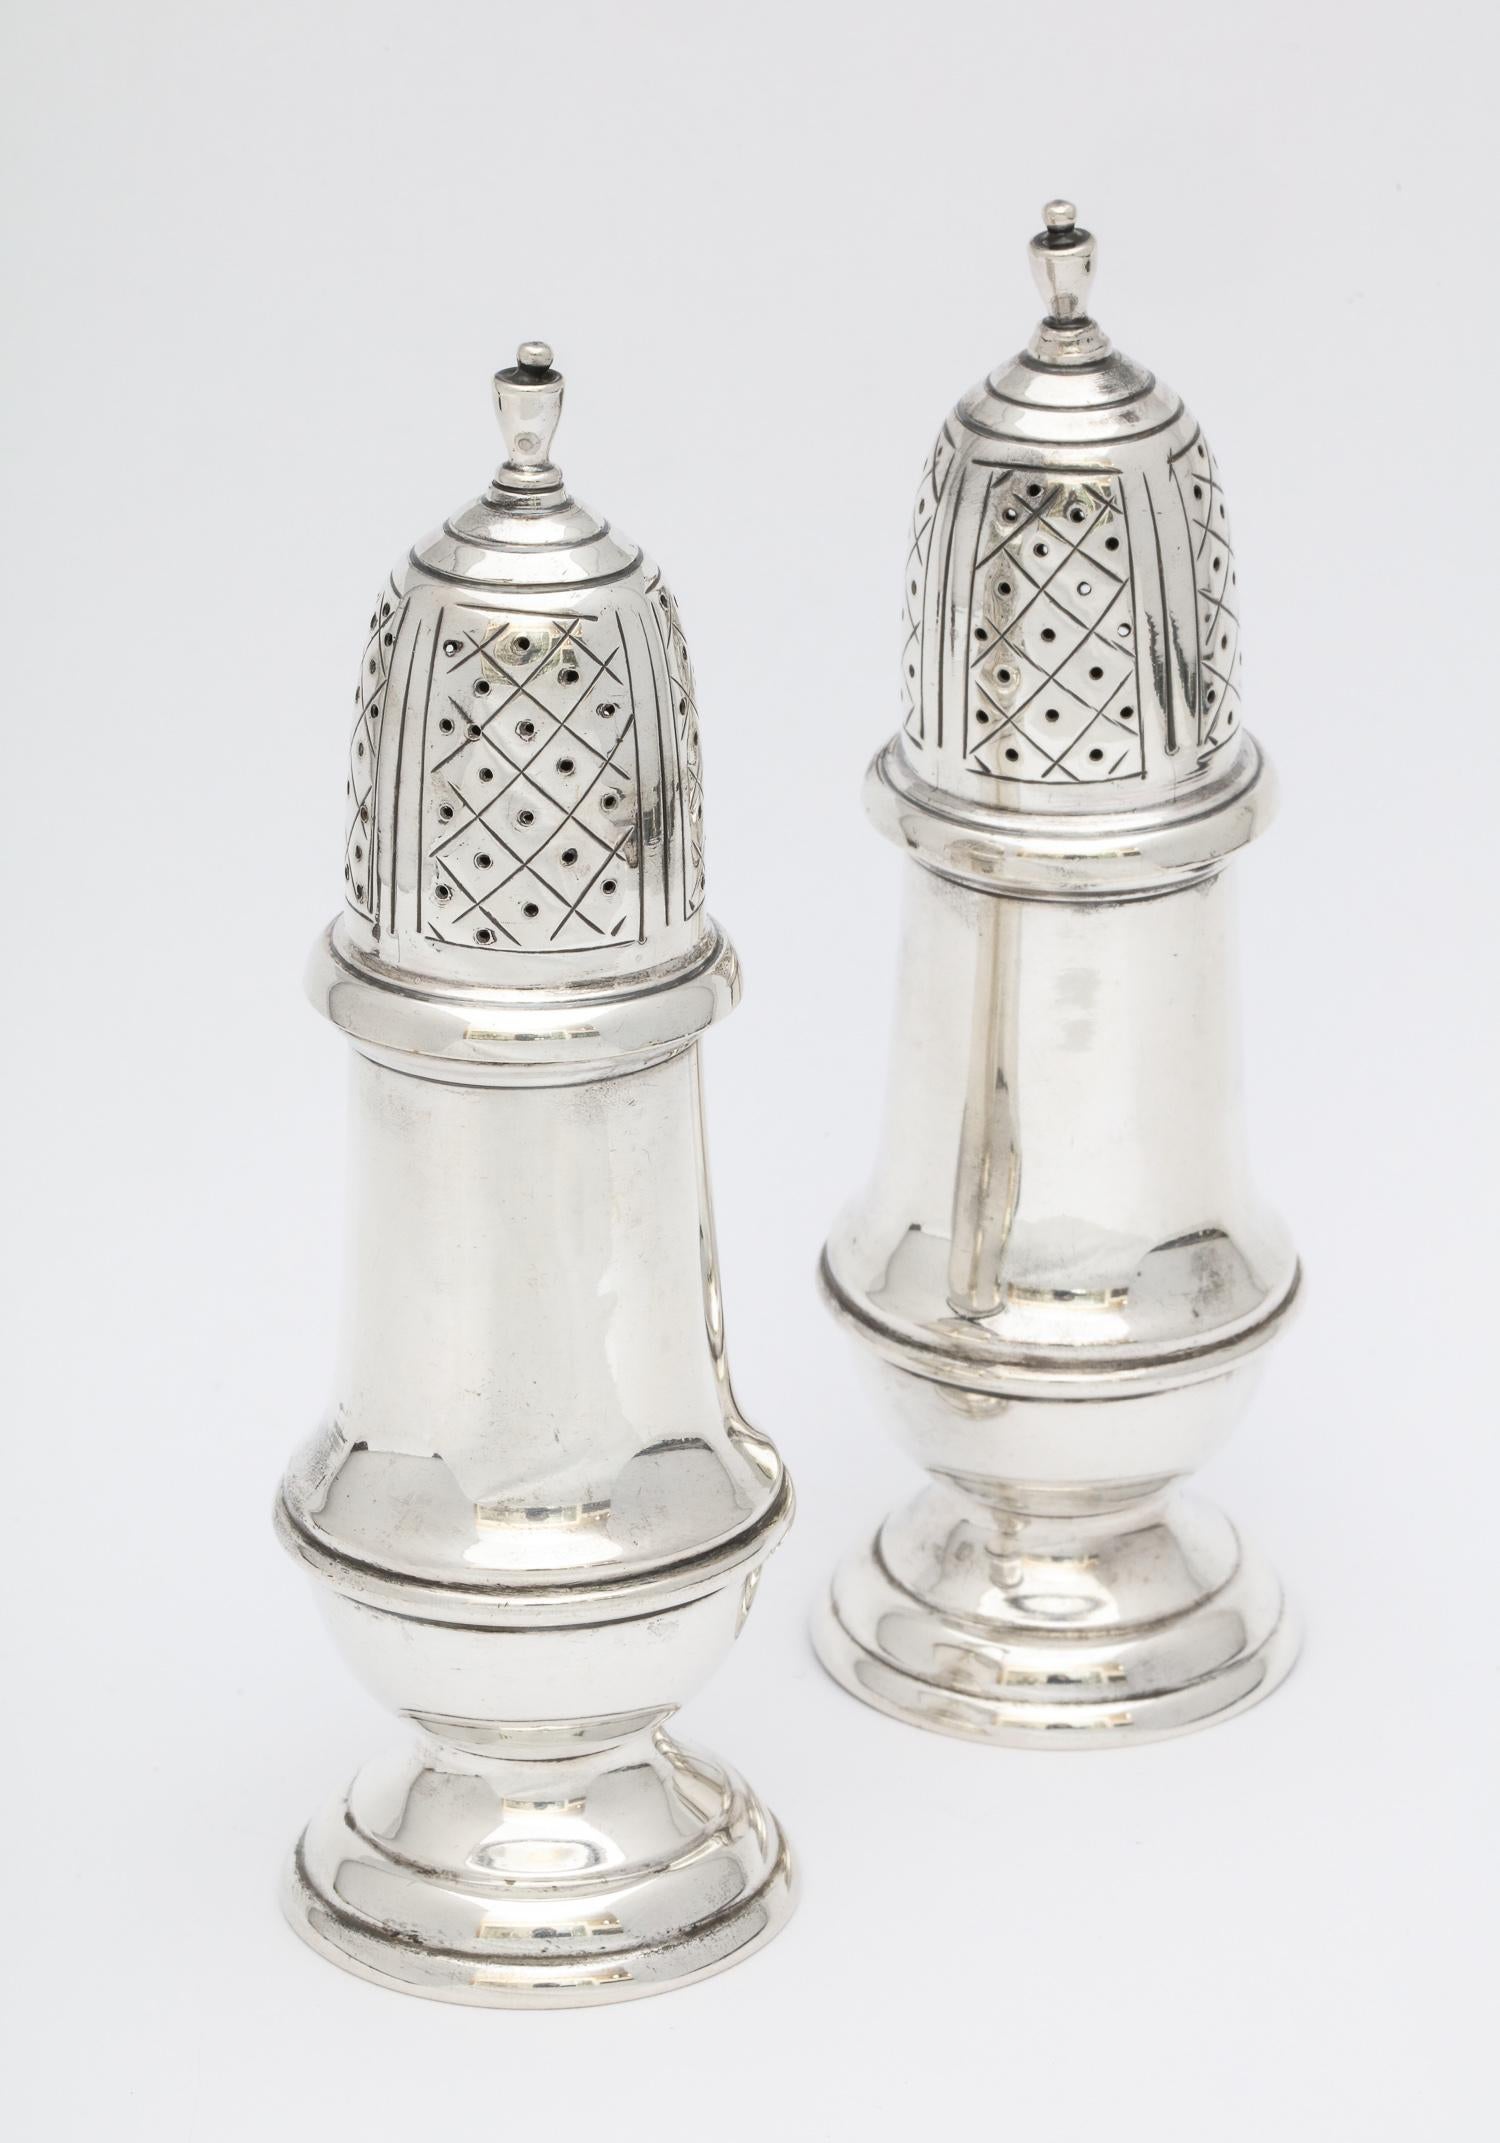 Pair of sterling silver, American Colonial style salt and pepper shakers or casters, American, circa 1930s. Made as reproductions of a pair made by Benjamin Burt (1729-1804). Each measures 5 3/4 inches high x 1 3/4 inches diameter at widest point;